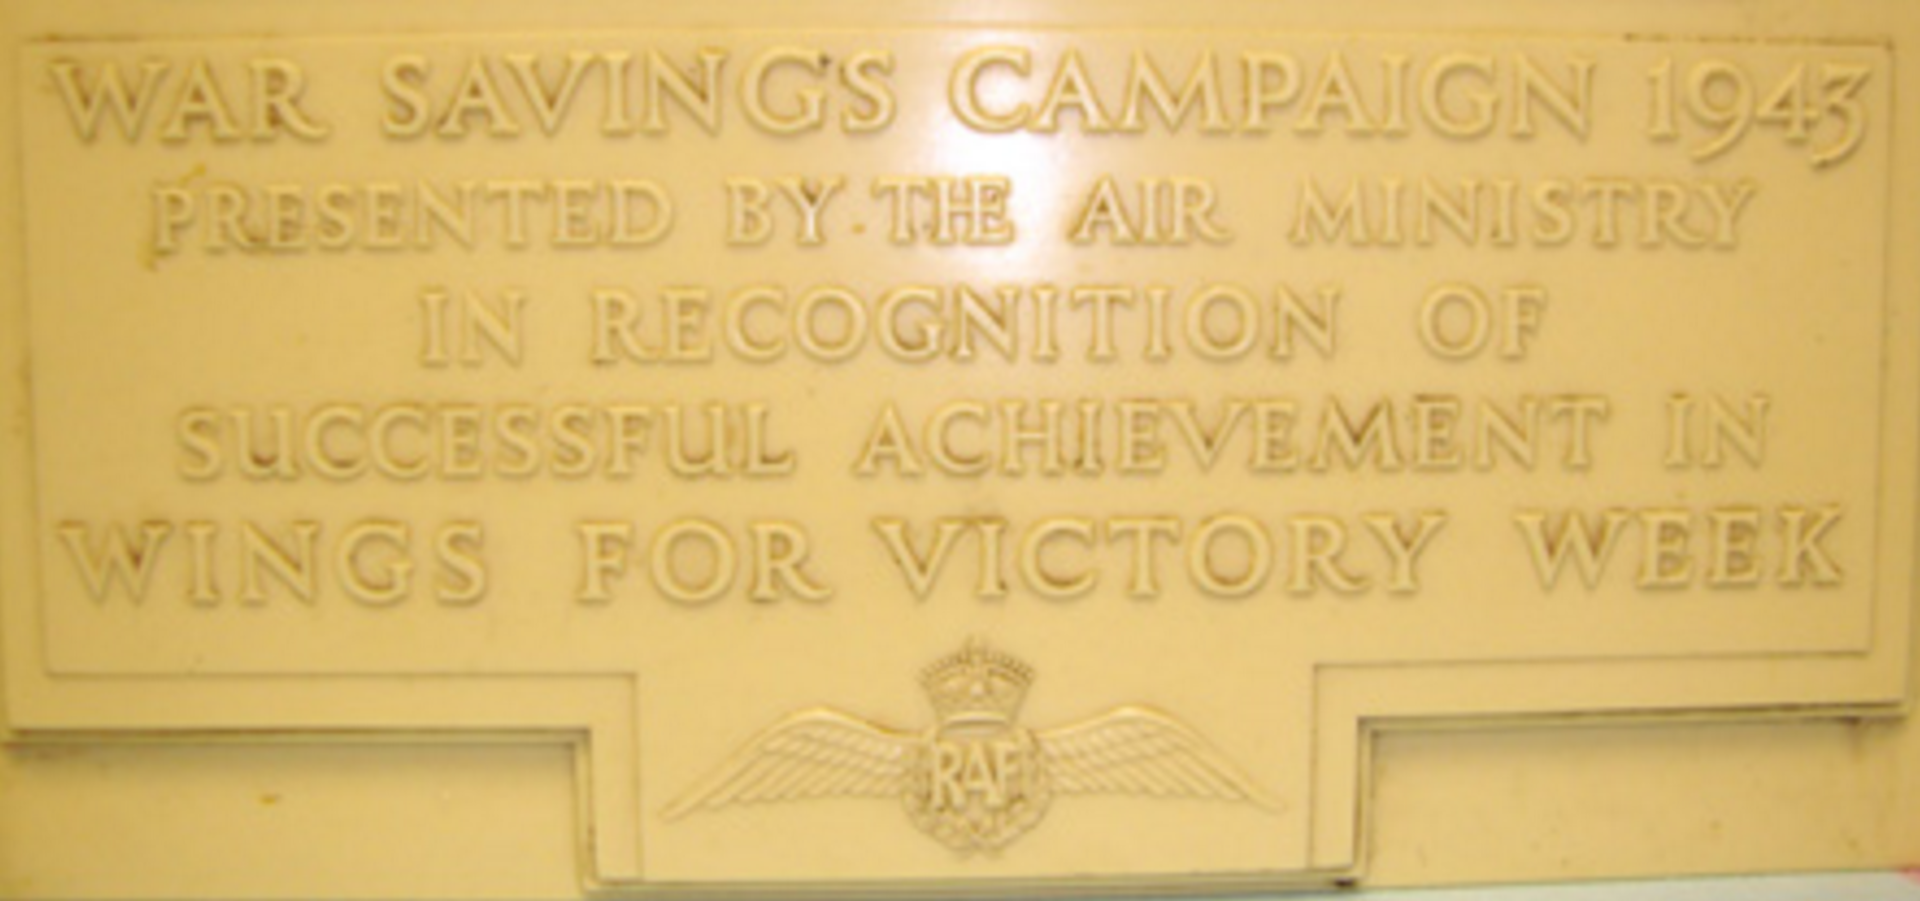 WW2 RAF War Savings Campaign "Wings for Victory" Plaque 1943 - Image 2 of 3